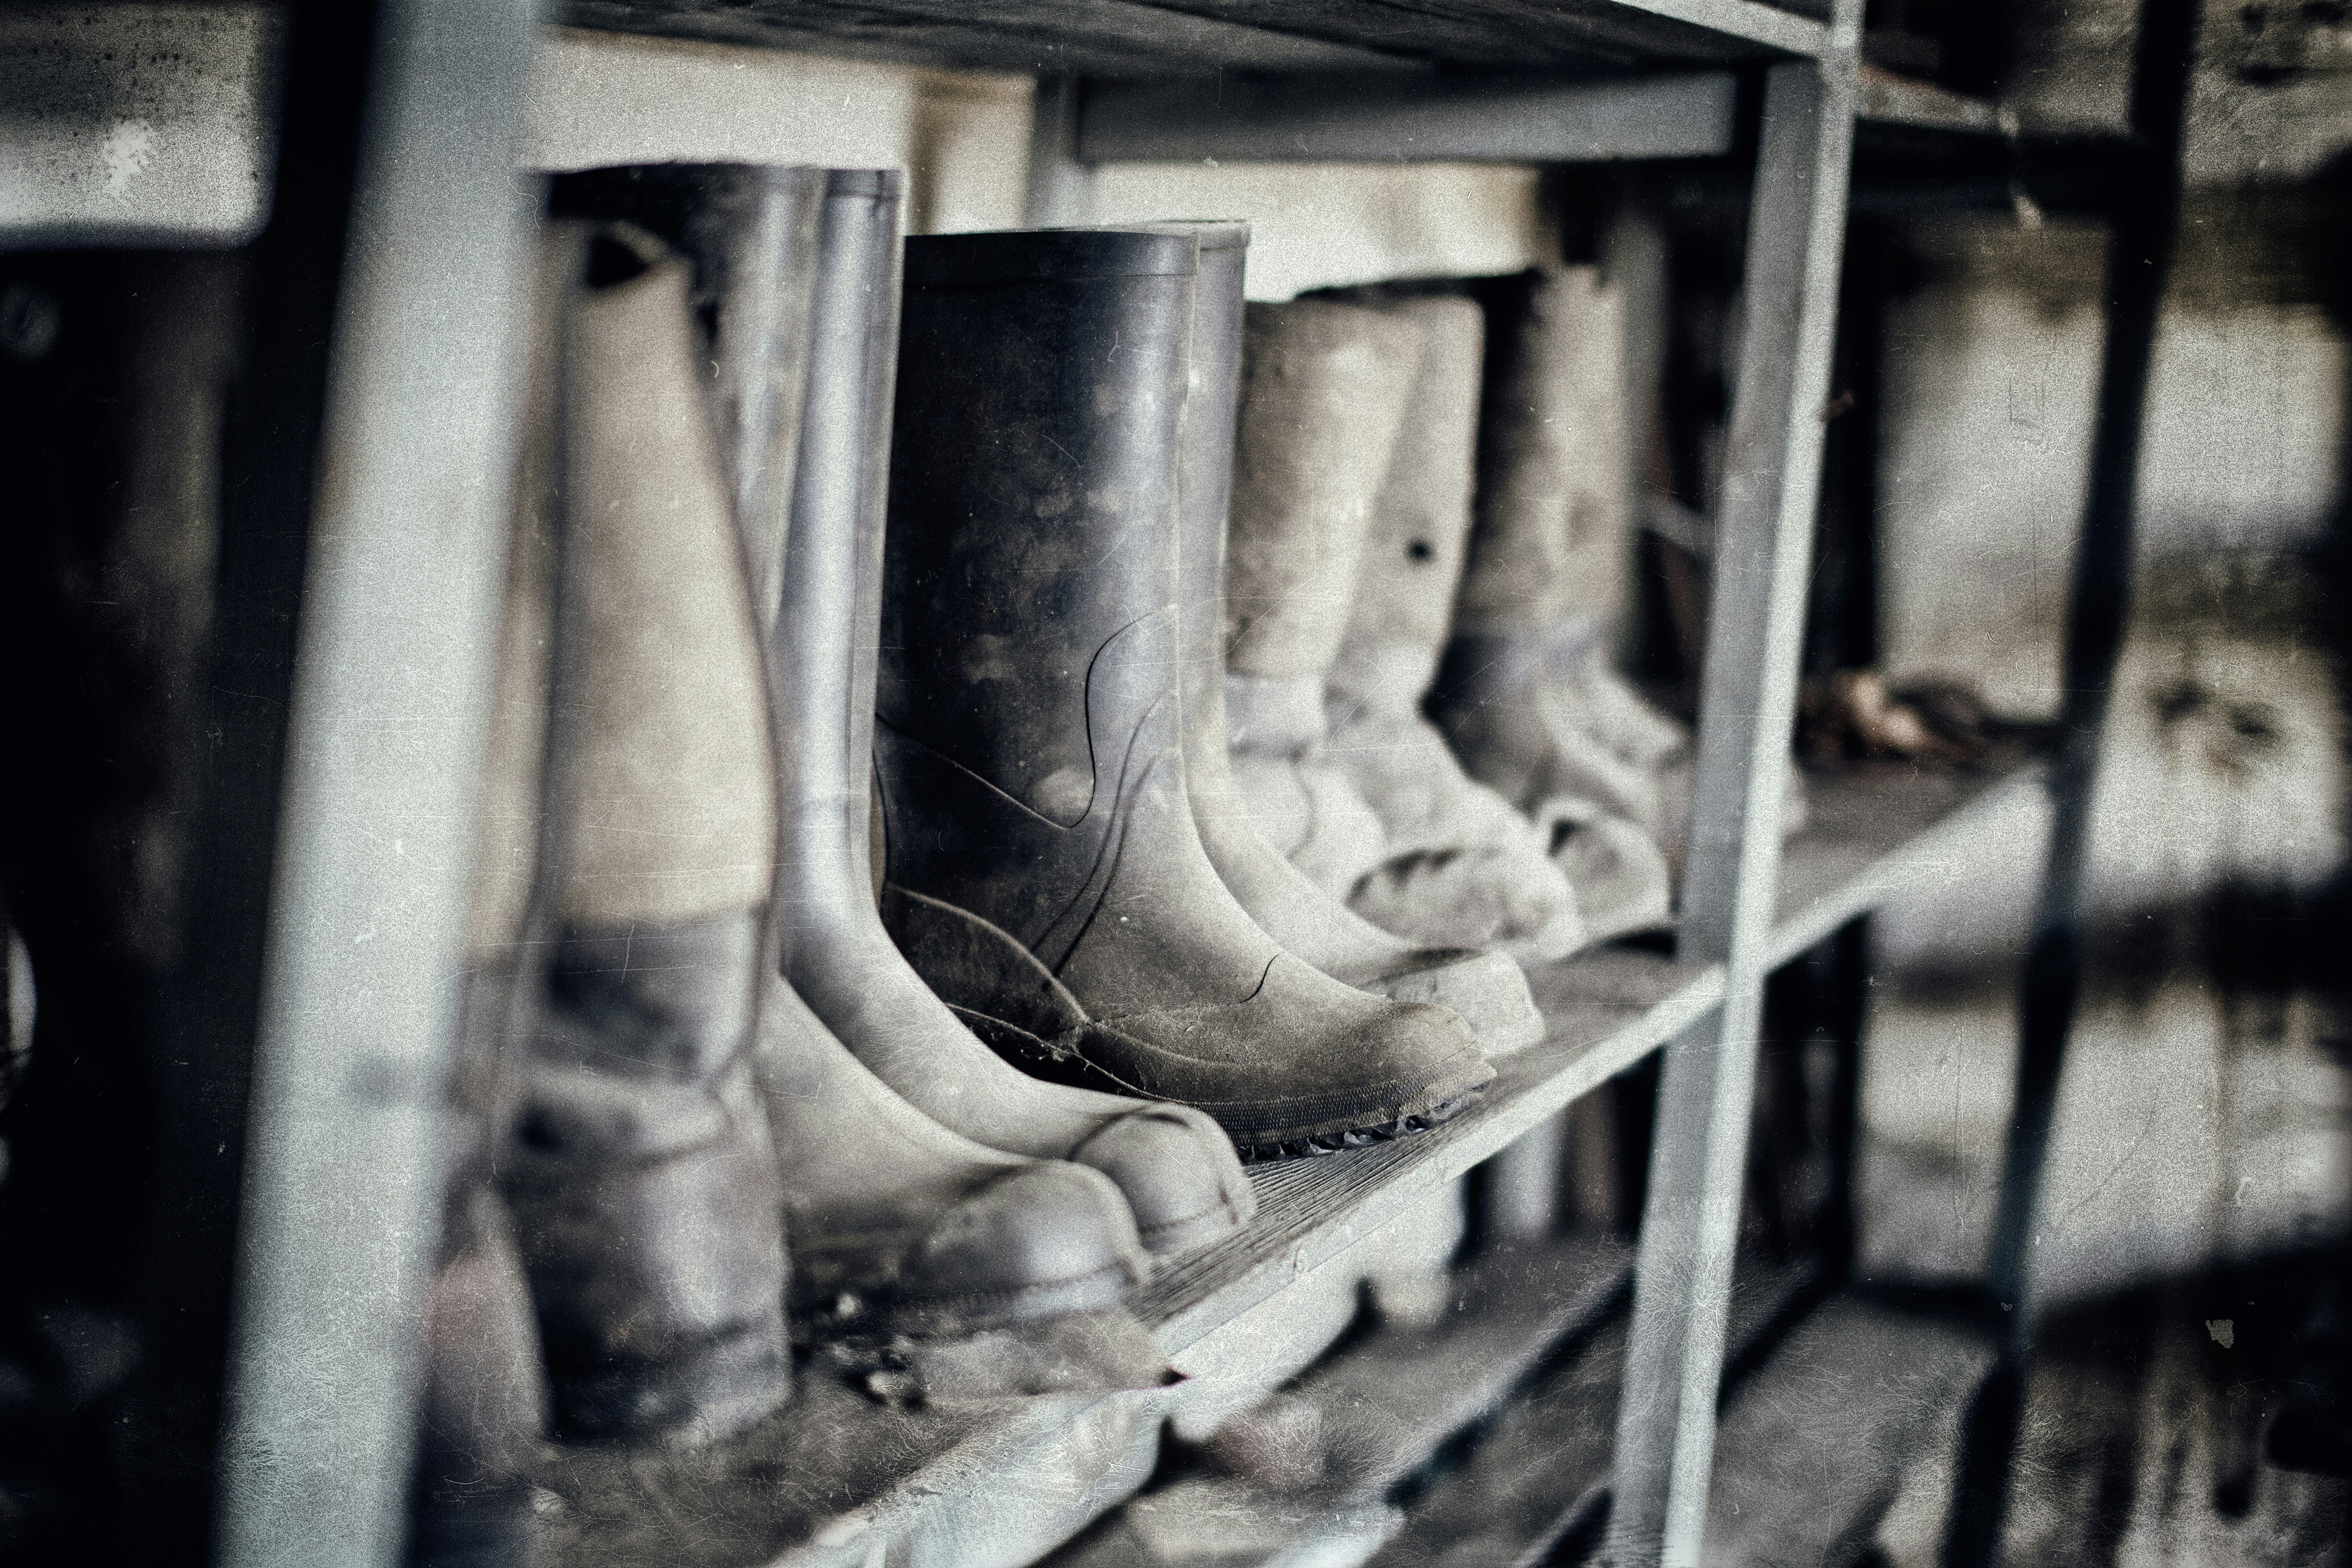  row of dirty safety boots on a shelf